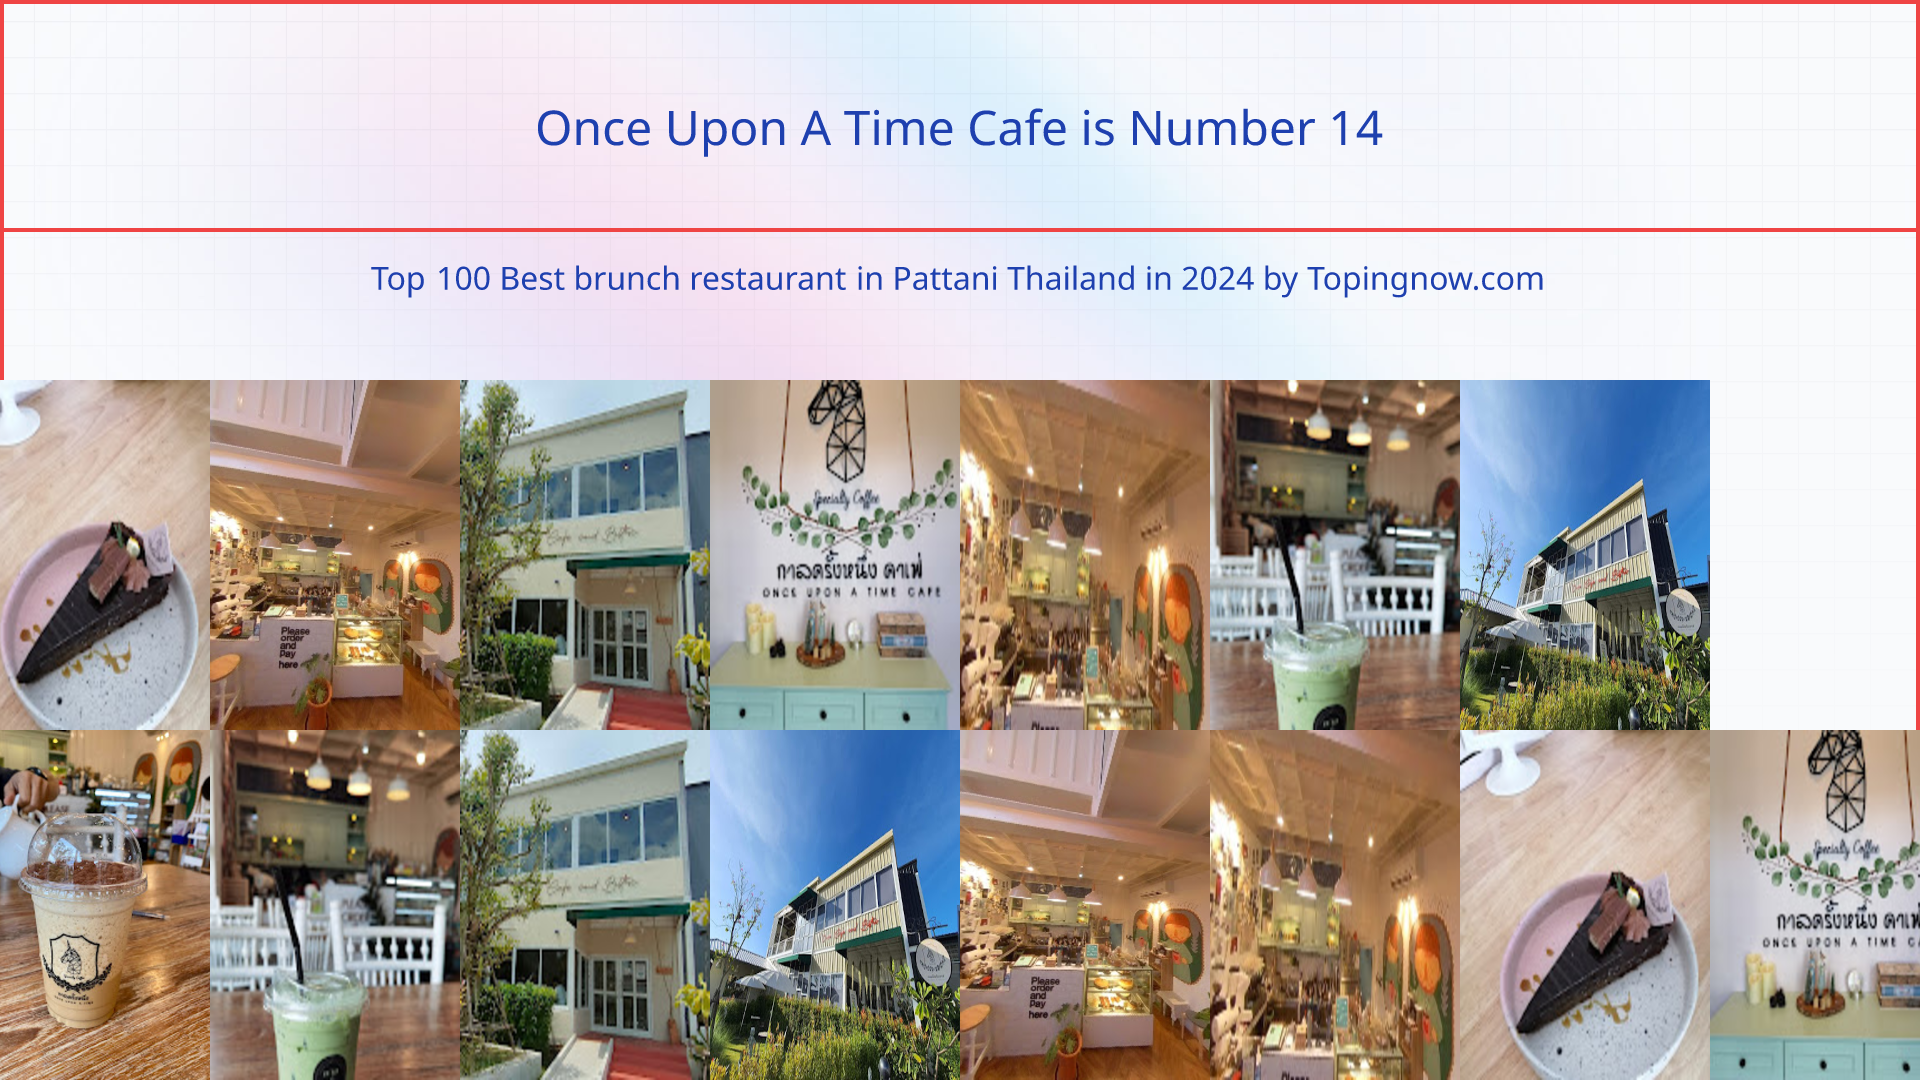 Once Upon A Time Cafe: Top 100 Best brunch restaurant in Pattani Thailand in 2024